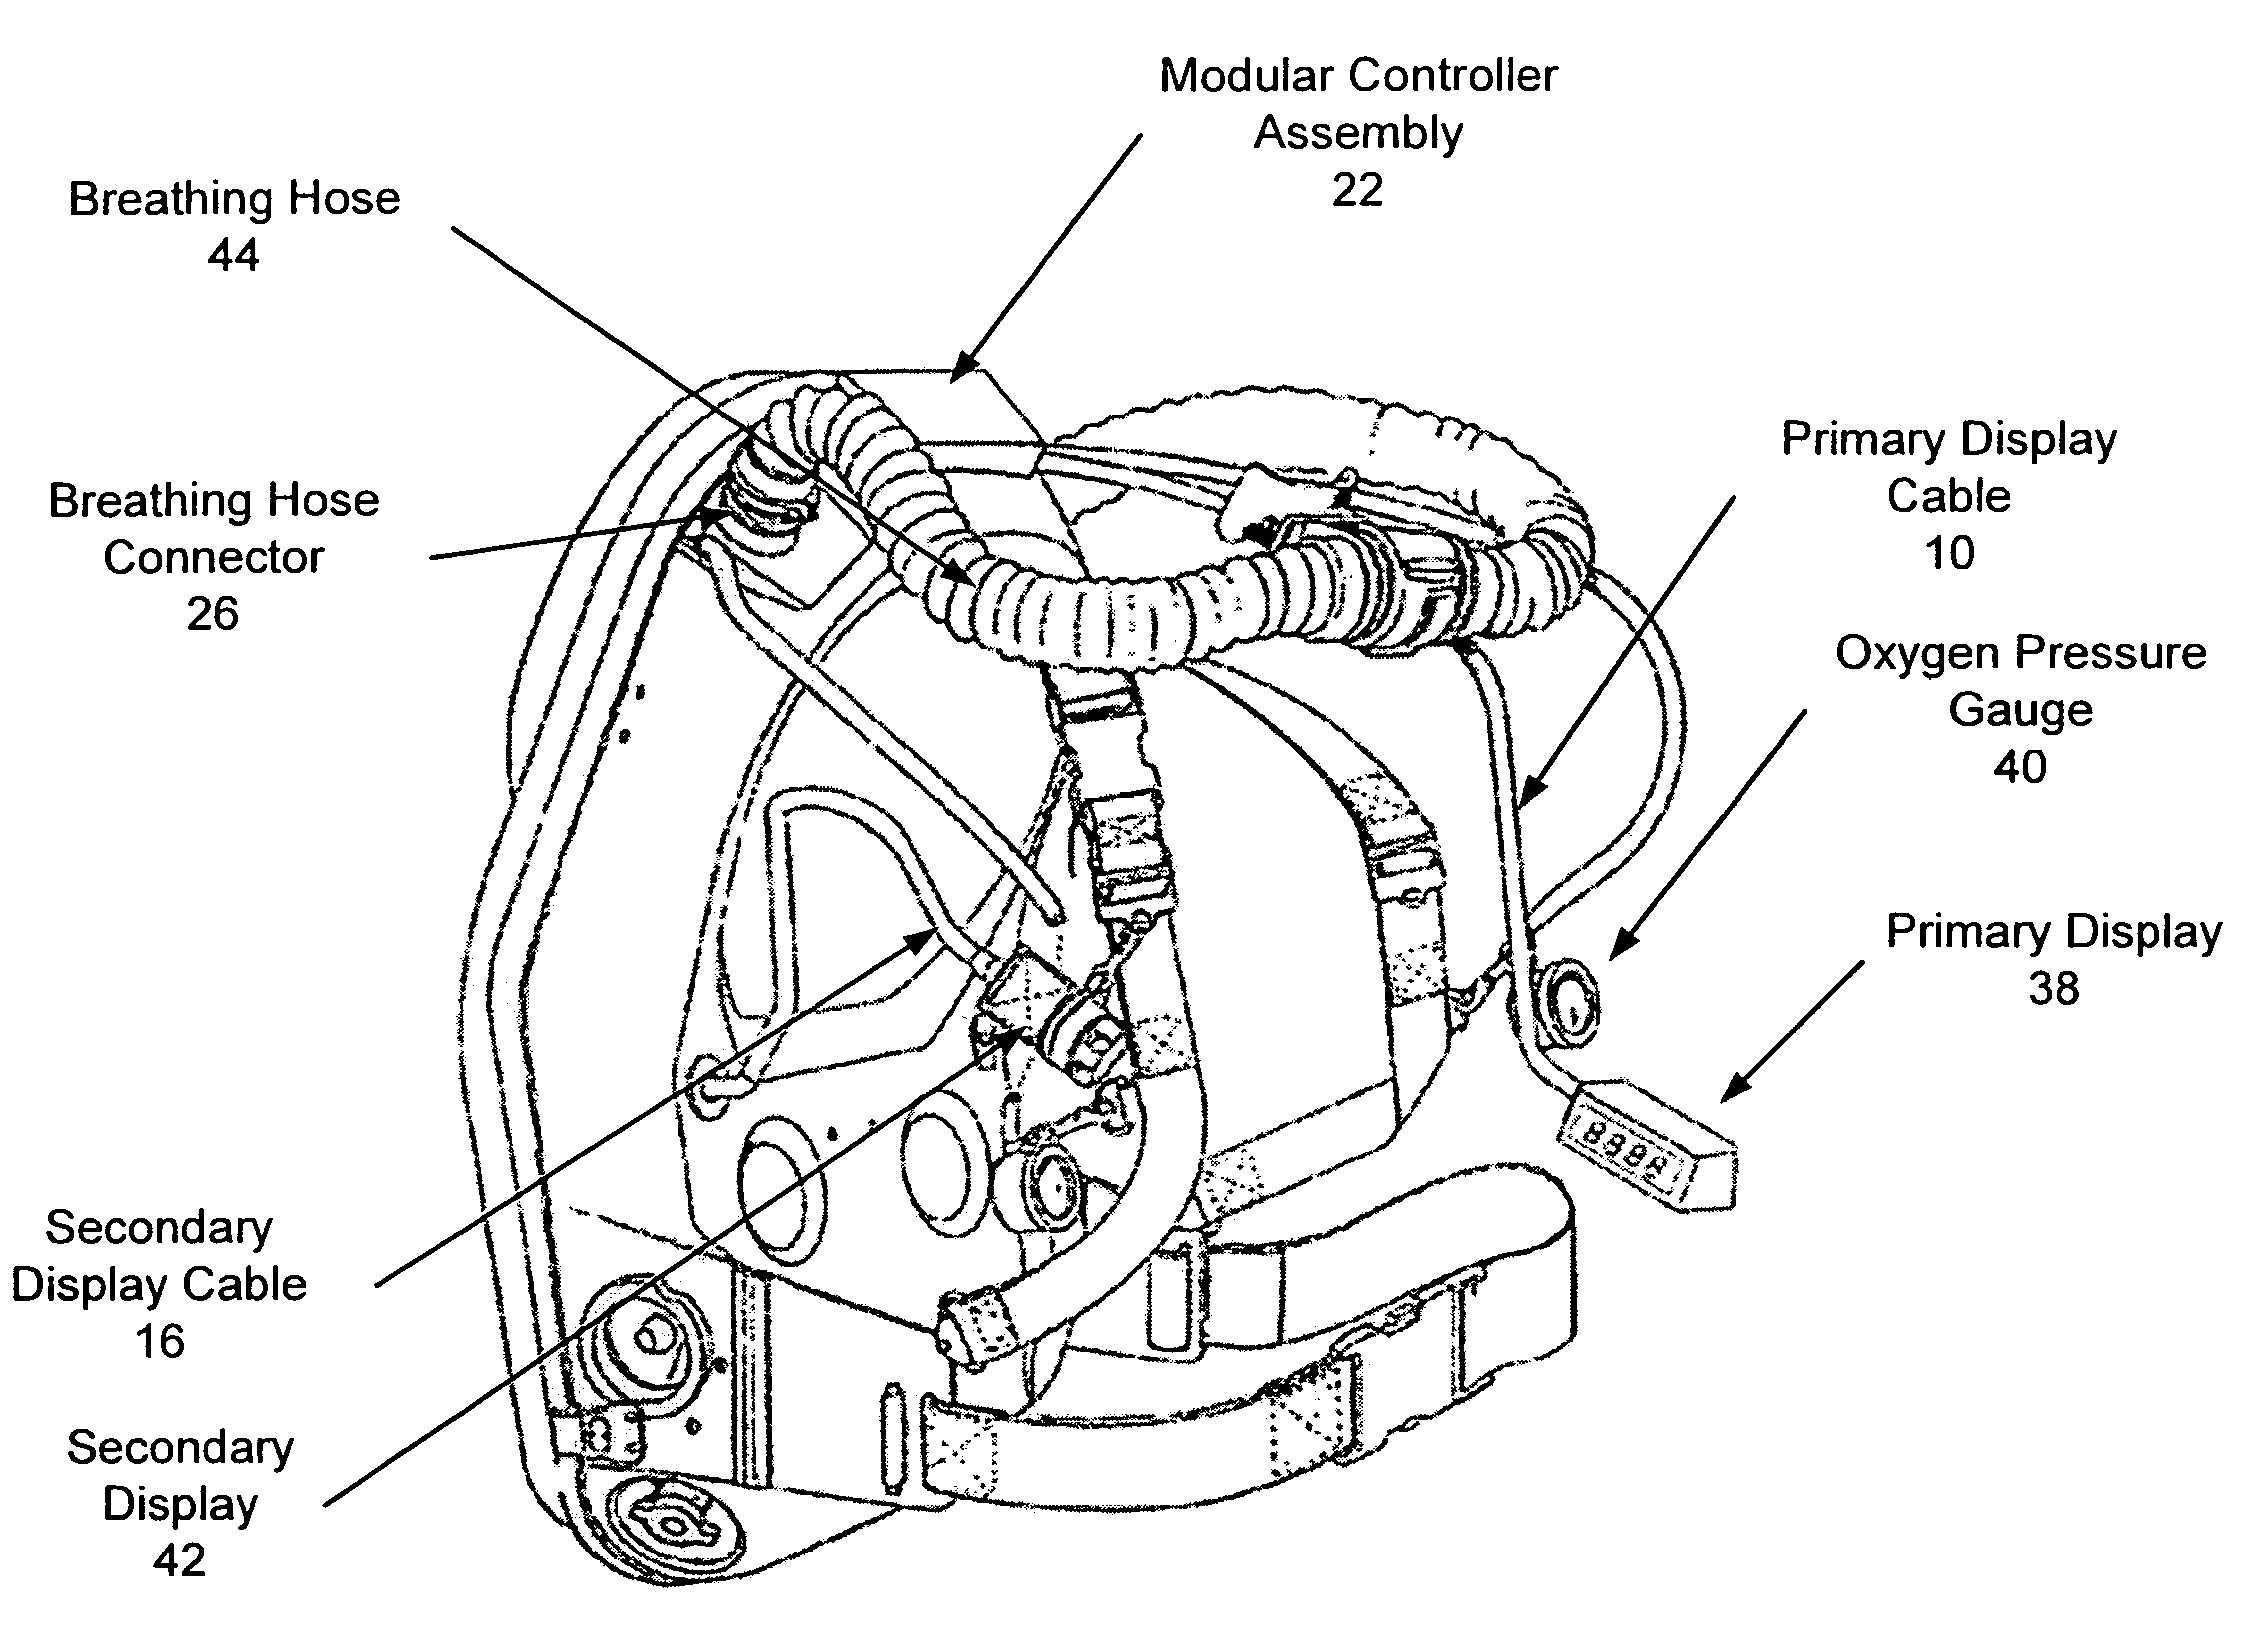 Self contained breathing apparatus modular control system